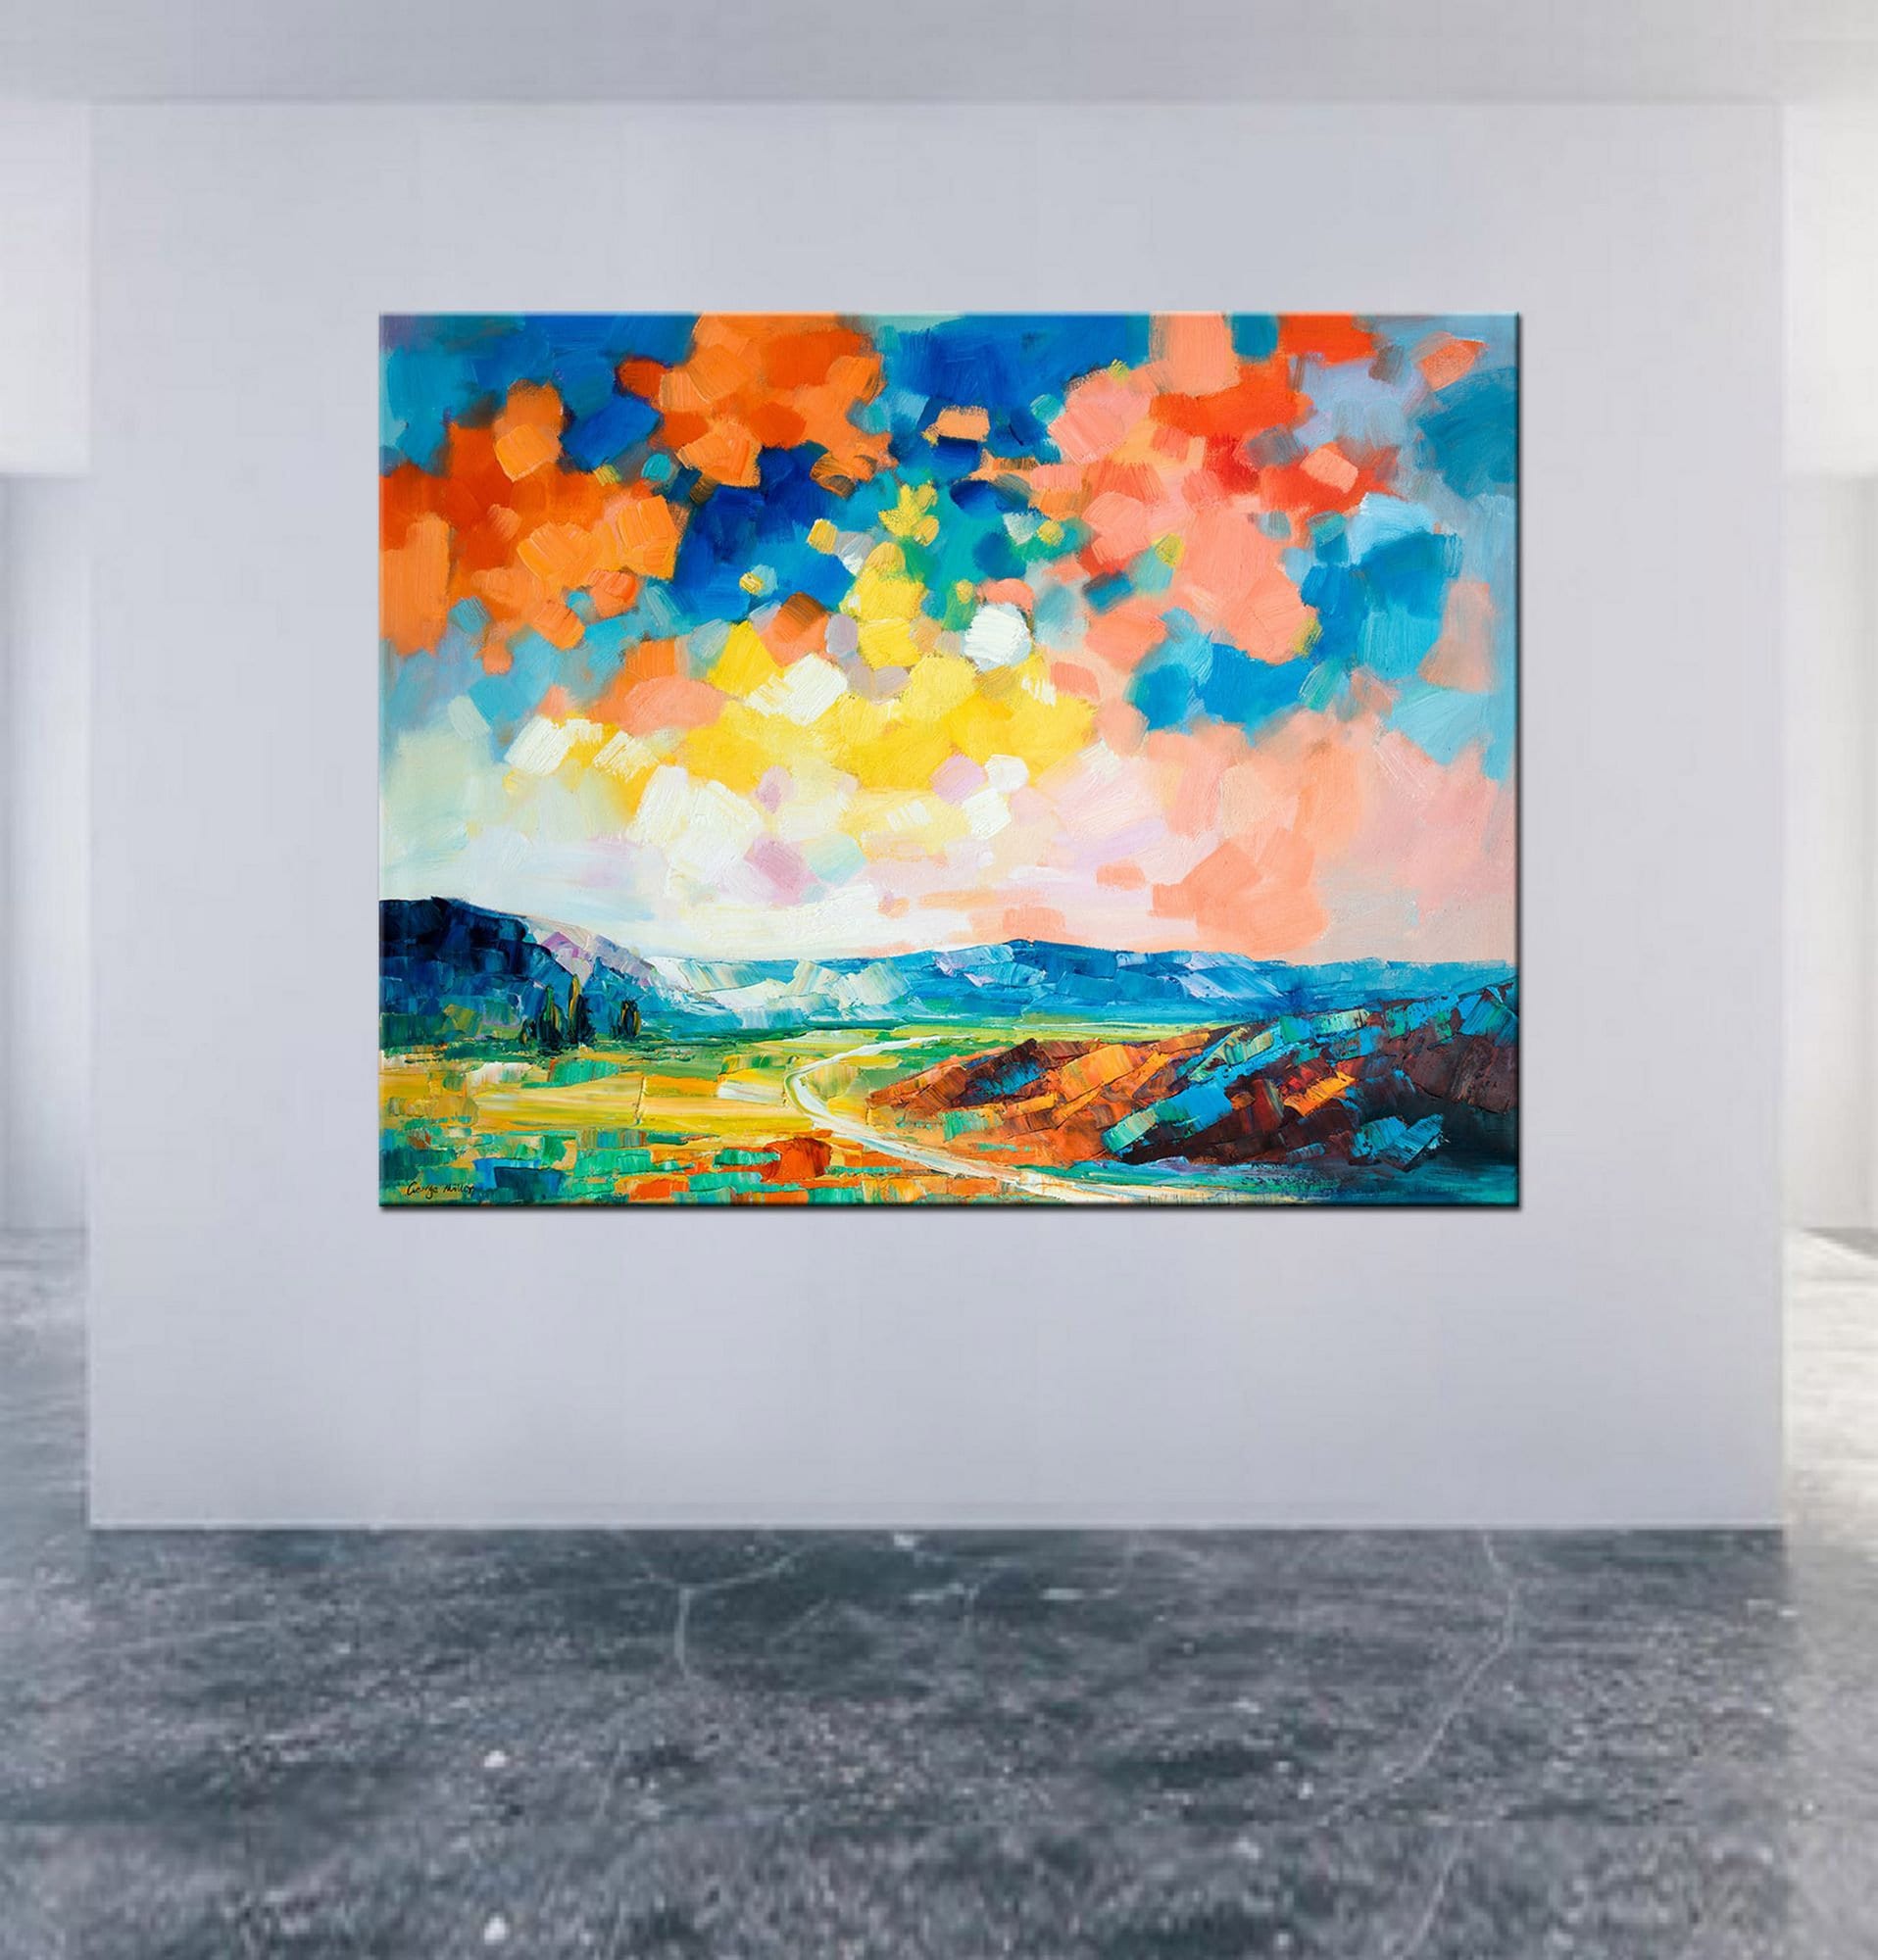 Abstract Oil Painting, Landscape Oil Painting, Large  Wall Art, Canvas Art, Decor, Original Oil Painting, Contemporary Art, Large Painting